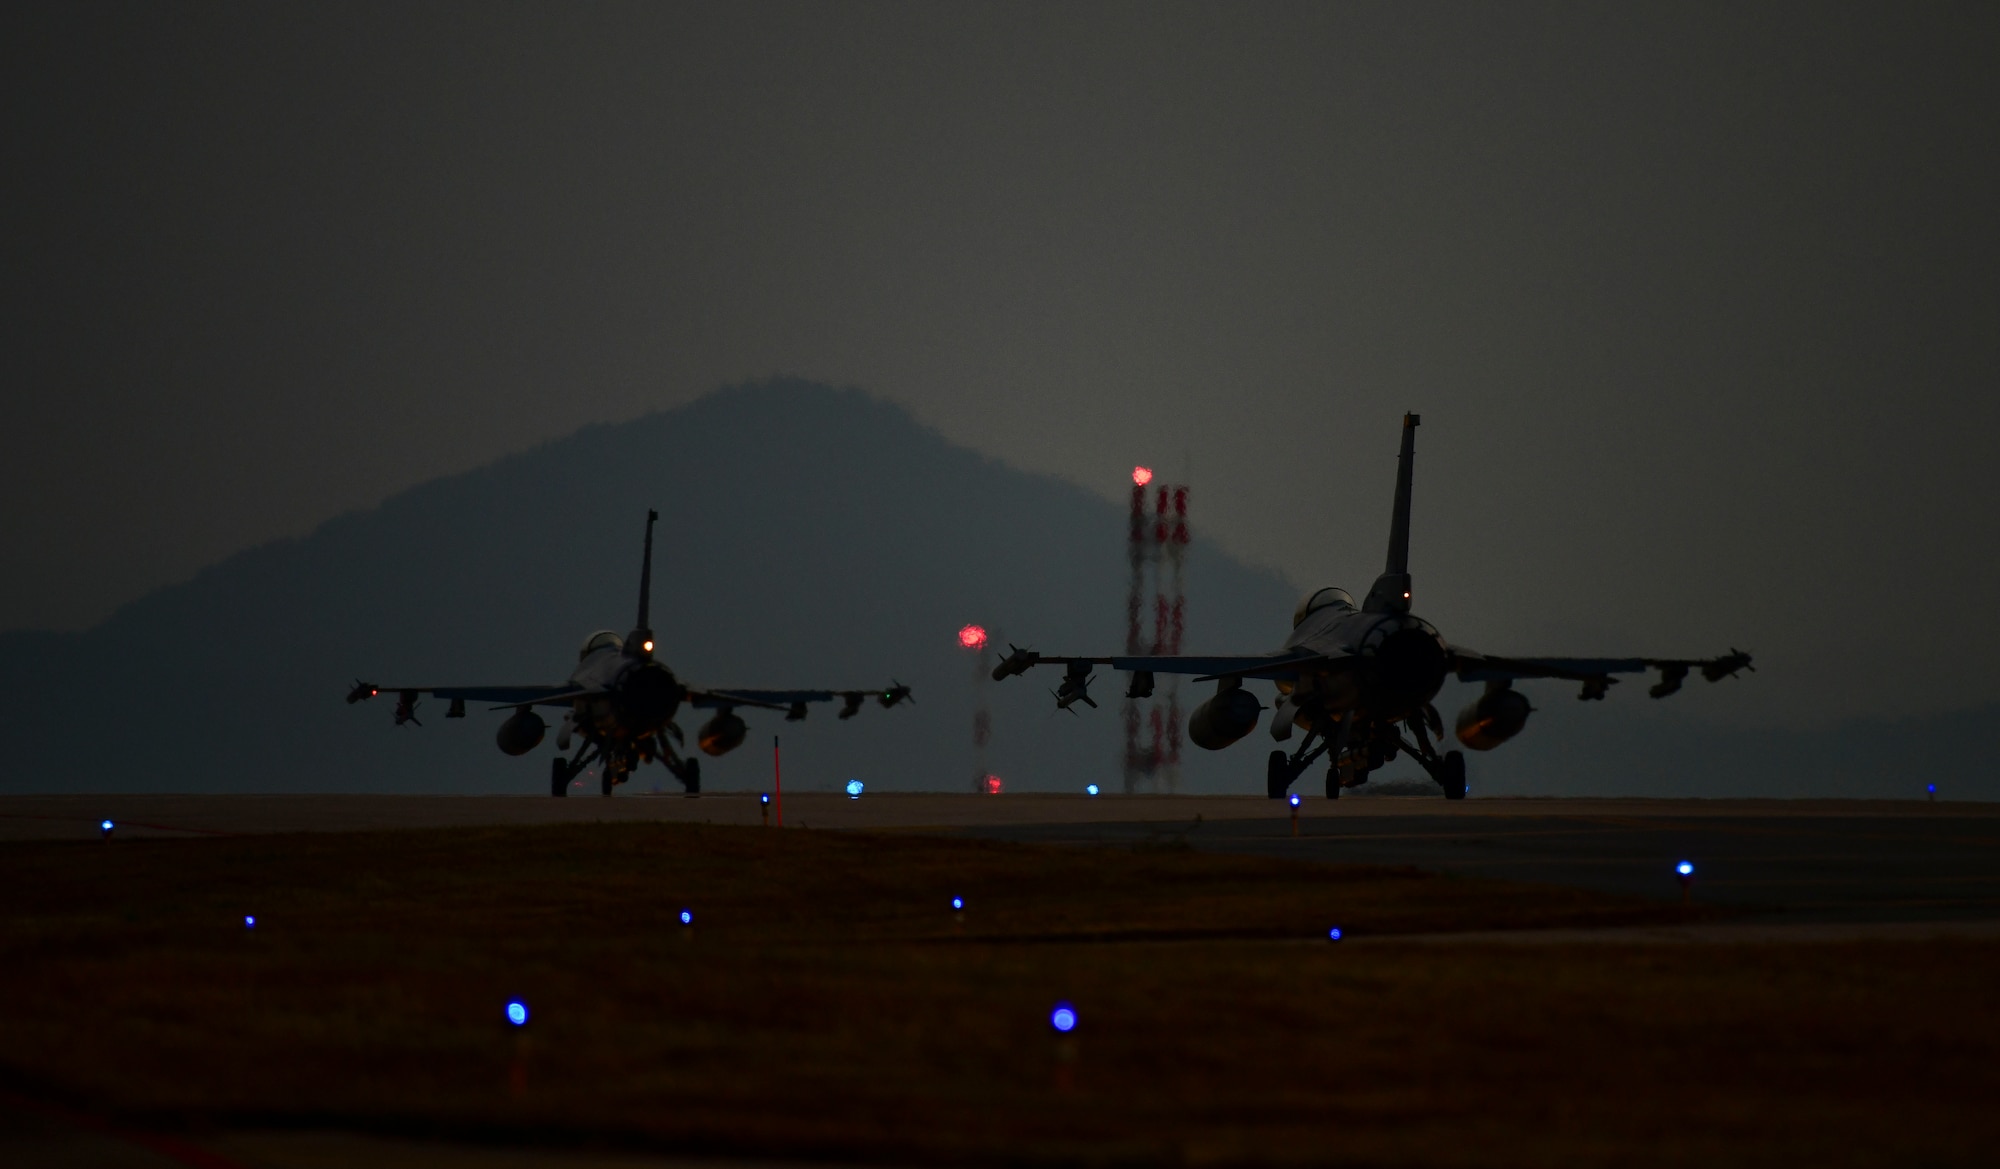 Two F-16 Fighting Falcons taxi and prepare for takeoff during routine training at Kunsan Air Base, Republic of Korea, Nov. 3, 2021. The F-16 is a compact, multi-role fighter aircraft, capable of highly maneuverable air-to-air combat and air-to-surface attack. (U.S. Air Force photo by Staff Sgt. Jesenia Landaverde)